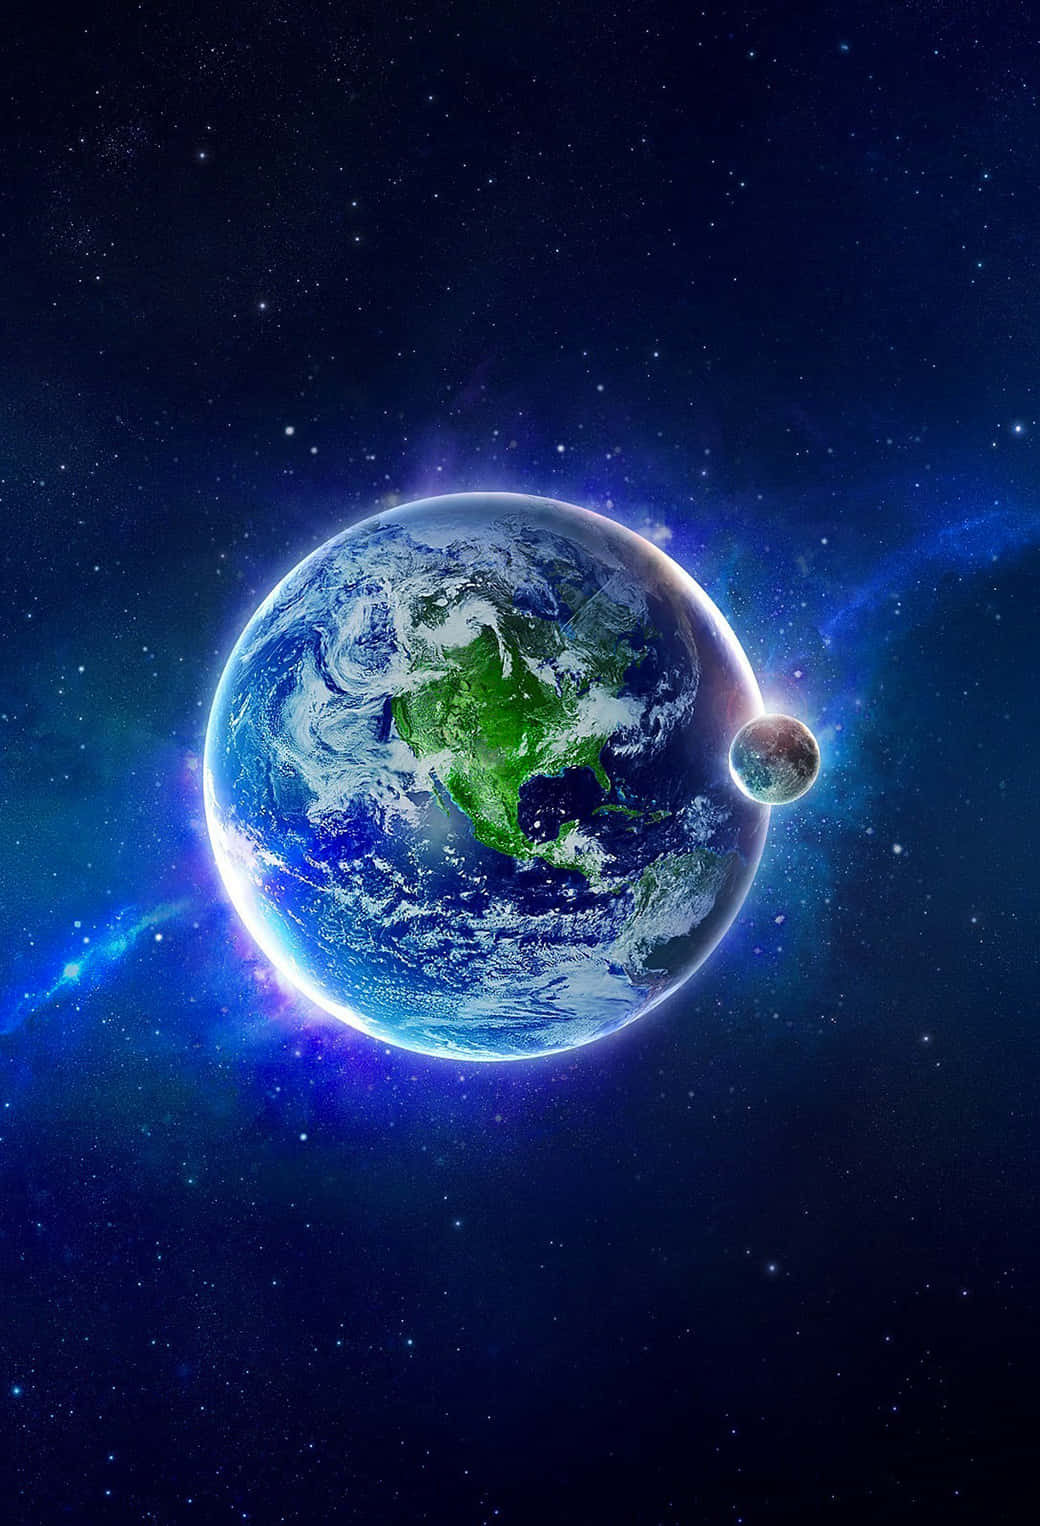 Free Earth Wallpaper Downloads, [400+] Earth Wallpapers for FREE |  